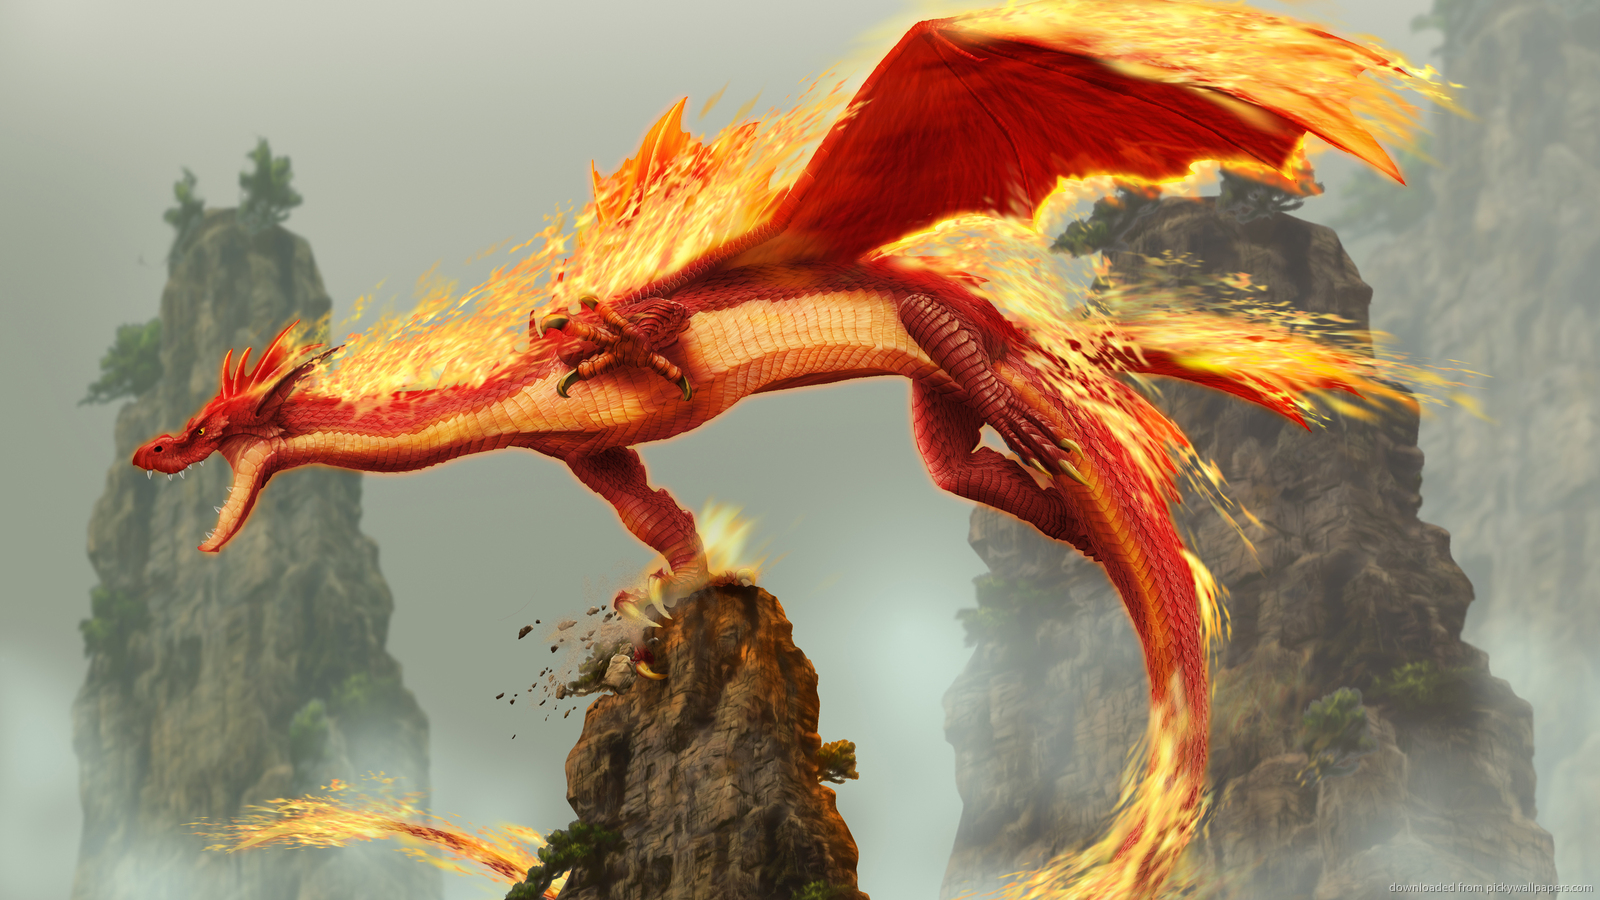 fire dragon wallpaper,dragon,geological phenomenon,cg artwork,fictional character,mythical creature